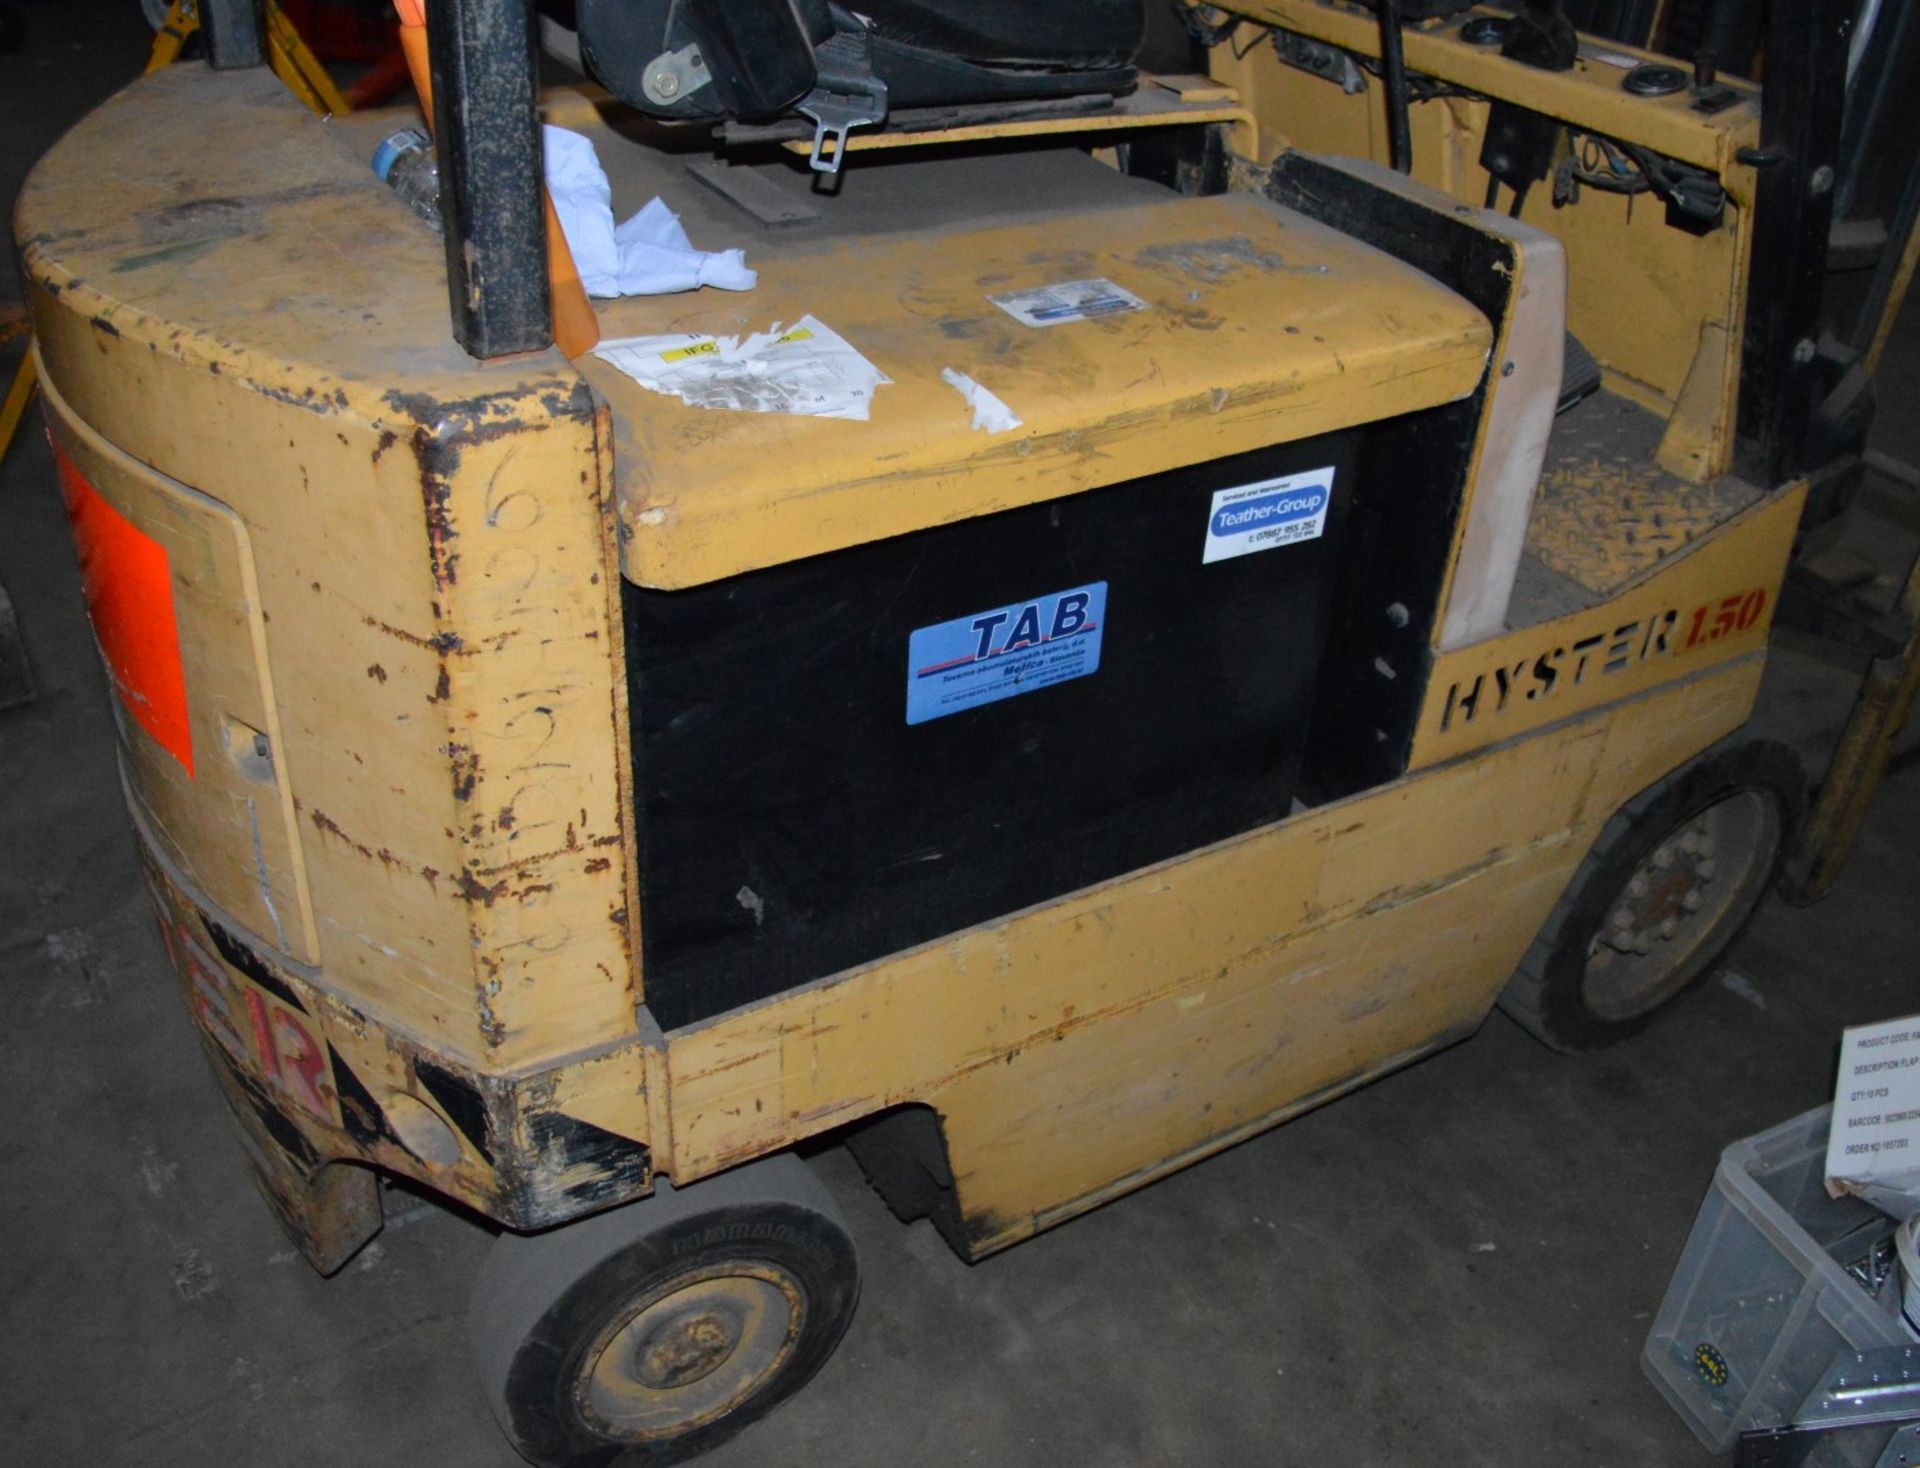 1 x Hyster 1.50 Electric Counter Balance Forklift Truck - 1200kg Lift Capacity - With Charger - Good - Image 12 of 15